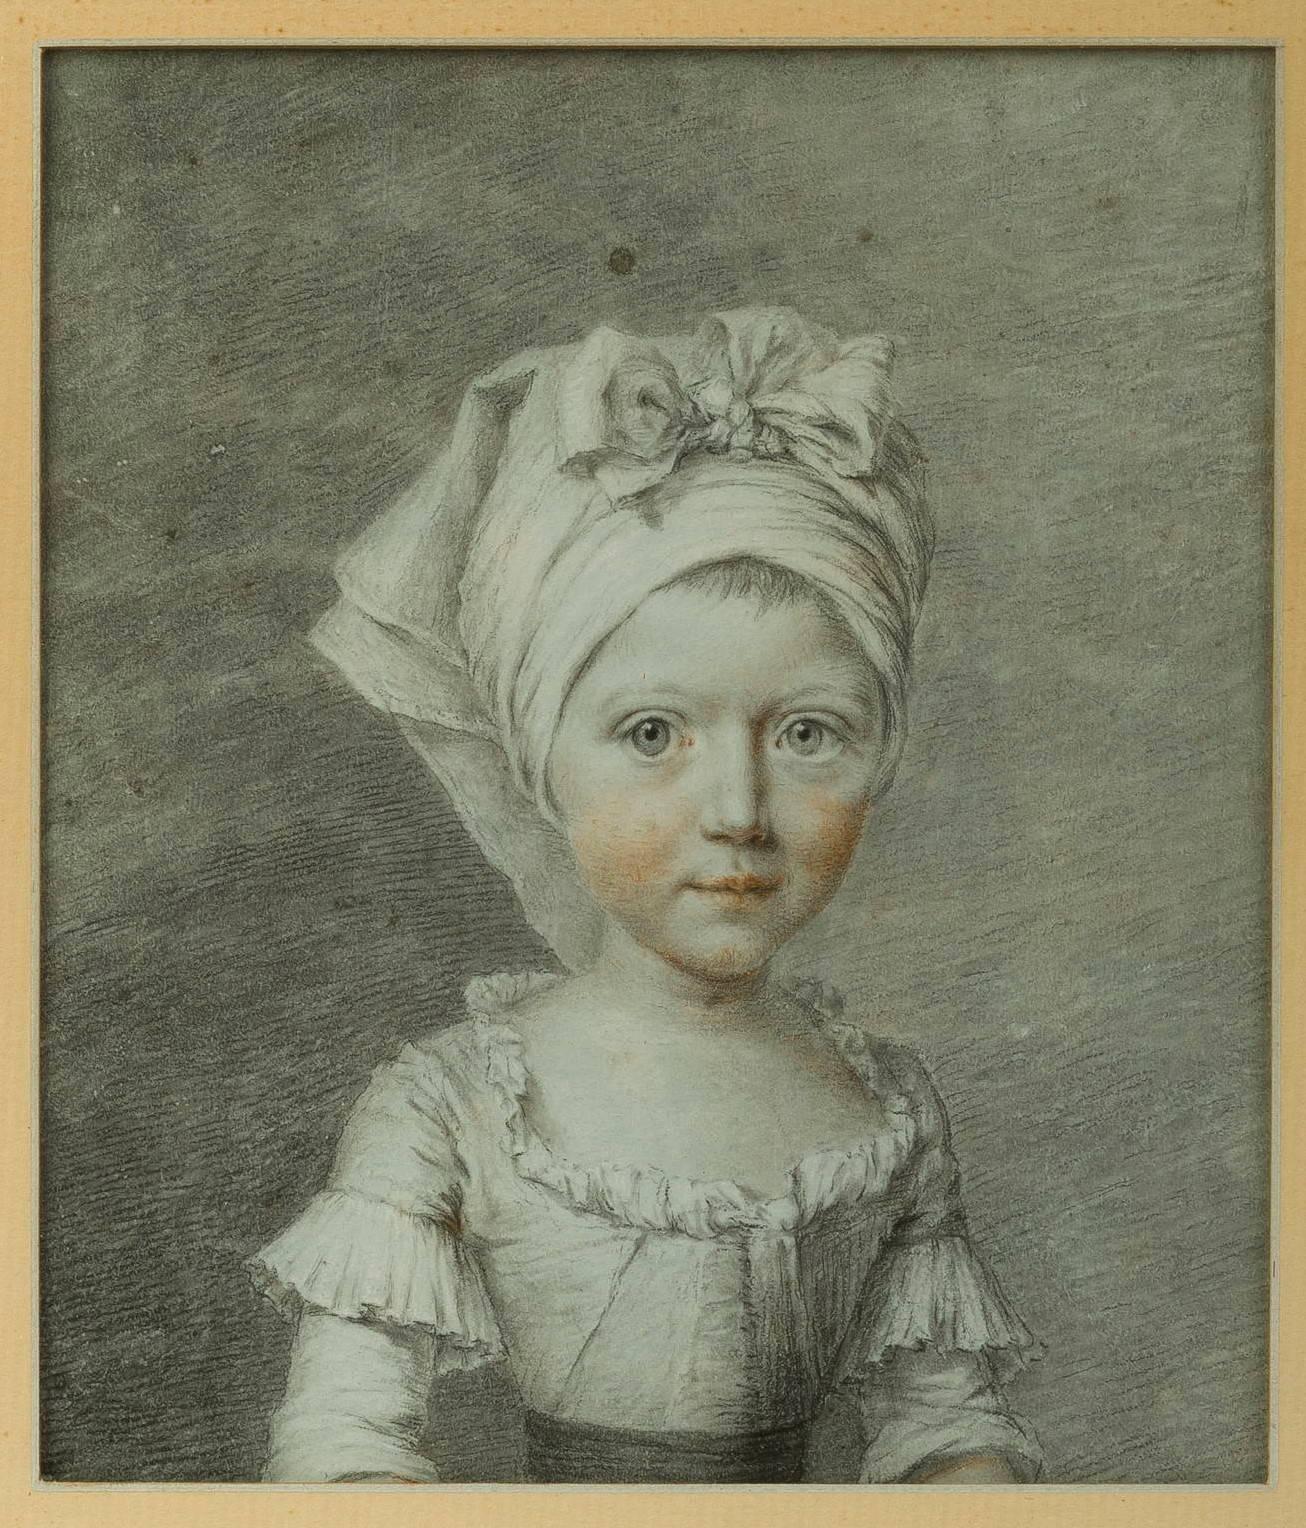 Portrait of a young girl with a bonnet, said to be Aglae Marie Marthe Elisabeth de Mounier de Lafosse, born in 1785 and four years old on this portrait, according to a label at the back.
Red and black chalk on paper.